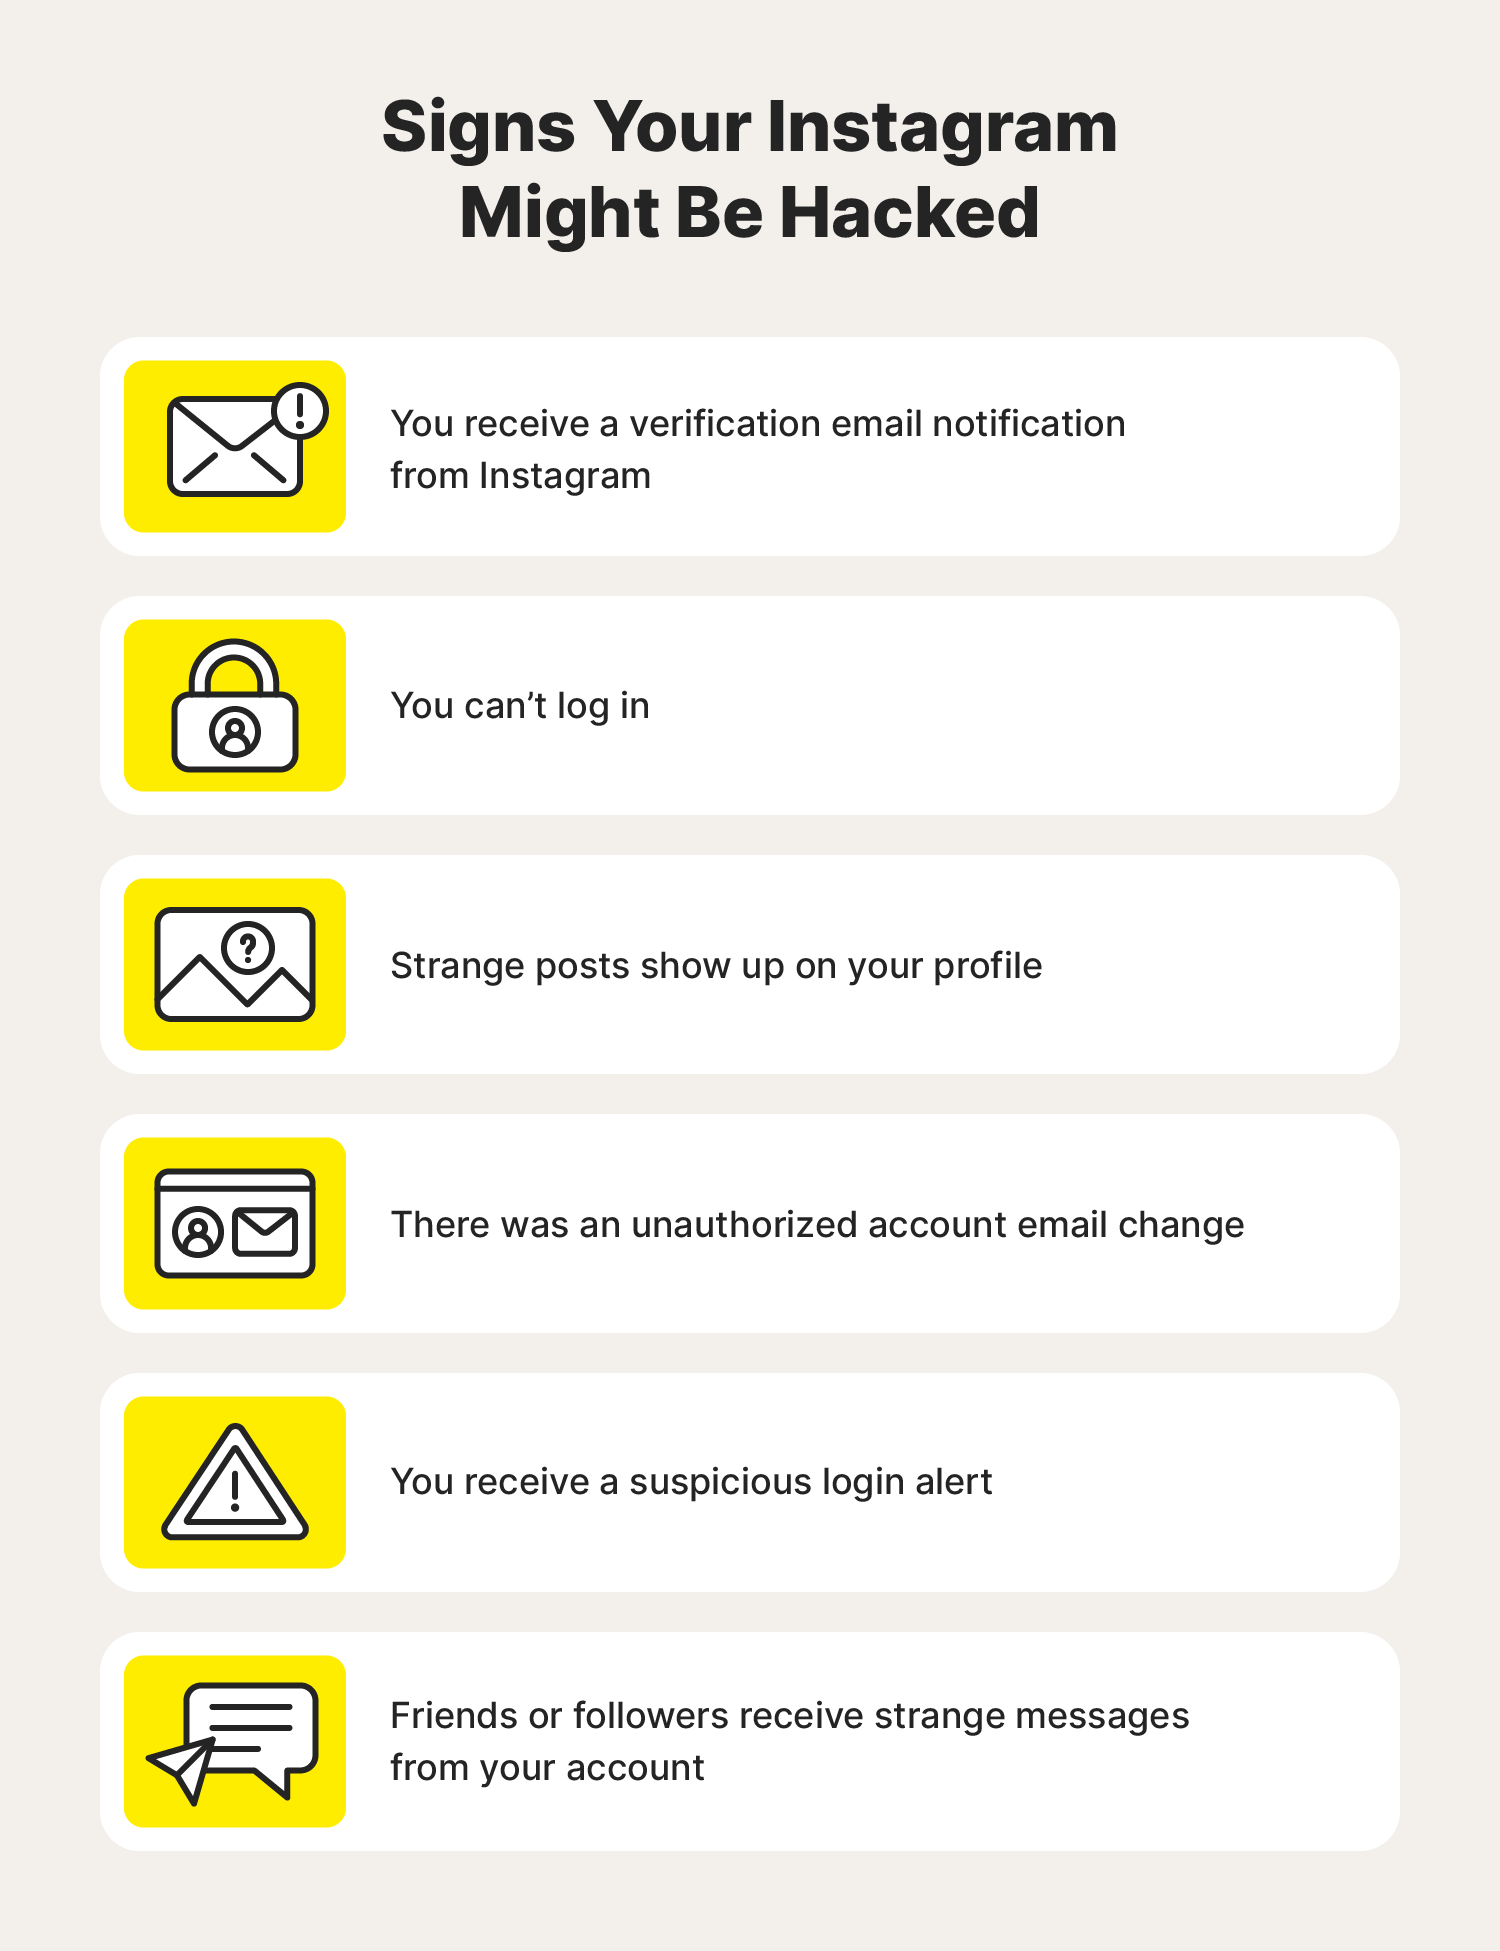 A list details the warning signs to look for in a hacked Instagram account.